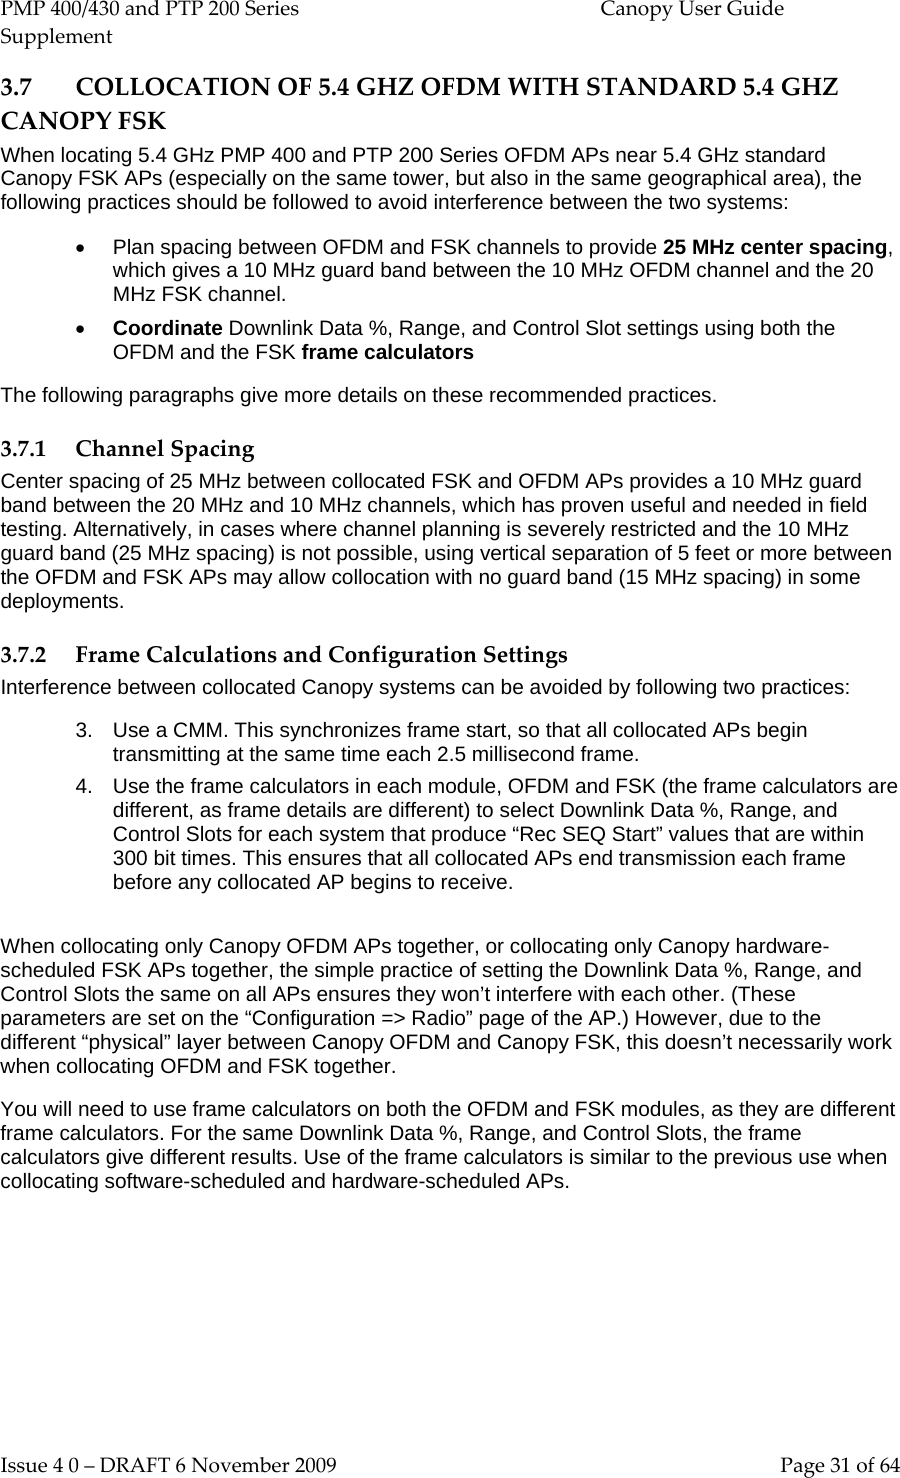 PMP 400/430 and PTP 200 Series  Canopy User Guide Supplement Issue 4 0 – DRAFT 6 November 2009    Page 31 of 64 3.7 COLLOCATION OF 5.4 GHZ OFDM WITH STANDARD 5.4 GHZ CANOPY FSK  When locating 5.4 GHz PMP 400 and PTP 200 Series OFDM APs near 5.4 GHz standard Canopy FSK APs (especially on the same tower, but also in the same geographical area), the following practices should be followed to avoid interference between the two systems: • Plan spacing between OFDM and FSK channels to provide 25 MHz center spacing, which gives a 10 MHz guard band between the 10 MHz OFDM channel and the 20 MHz FSK channel. • Coordinate Downlink Data %, Range, and Control Slot settings using both the OFDM and the FSK frame calculators The following paragraphs give more details on these recommended practices. 3.7.1 Channel Spacing Center spacing of 25 MHz between collocated FSK and OFDM APs provides a 10 MHz guard band between the 20 MHz and 10 MHz channels, which has proven useful and needed in field testing. Alternatively, in cases where channel planning is severely restricted and the 10 MHz guard band (25 MHz spacing) is not possible, using vertical separation of 5 feet or more between the OFDM and FSK APs may allow collocation with no guard band (15 MHz spacing) in some deployments. 3.7.2 Frame Calculations and Configuration Settings Interference between collocated Canopy systems can be avoided by following two practices: 3. Use a CMM. This synchronizes frame start, so that all collocated APs begin transmitting at the same time each 2.5 millisecond frame. 4. Use the frame calculators in each module, OFDM and FSK (the frame calculators are different, as frame details are different) to select Downlink Data %, Range, and Control Slots for each system that produce “Rec SEQ Start” values that are within 300 bit times. This ensures that all collocated APs end transmission each frame before any collocated AP begins to receive.  When collocating only Canopy OFDM APs together, or collocating only Canopy hardware-scheduled FSK APs together, the simple practice of setting the Downlink Data %, Range, and Control Slots the same on all APs ensures they won’t interfere with each other. (These parameters are set on the “Configuration =&gt; Radio” page of the AP.) However, due to the different “physical” layer between Canopy OFDM and Canopy FSK, this doesn’t necessarily work when collocating OFDM and FSK together. You will need to use frame calculators on both the OFDM and FSK modules, as they are different frame calculators. For the same Downlink Data %, Range, and Control Slots, the frame calculators give different results. Use of the frame calculators is similar to the previous use when collocating software-scheduled and hardware-scheduled APs. 